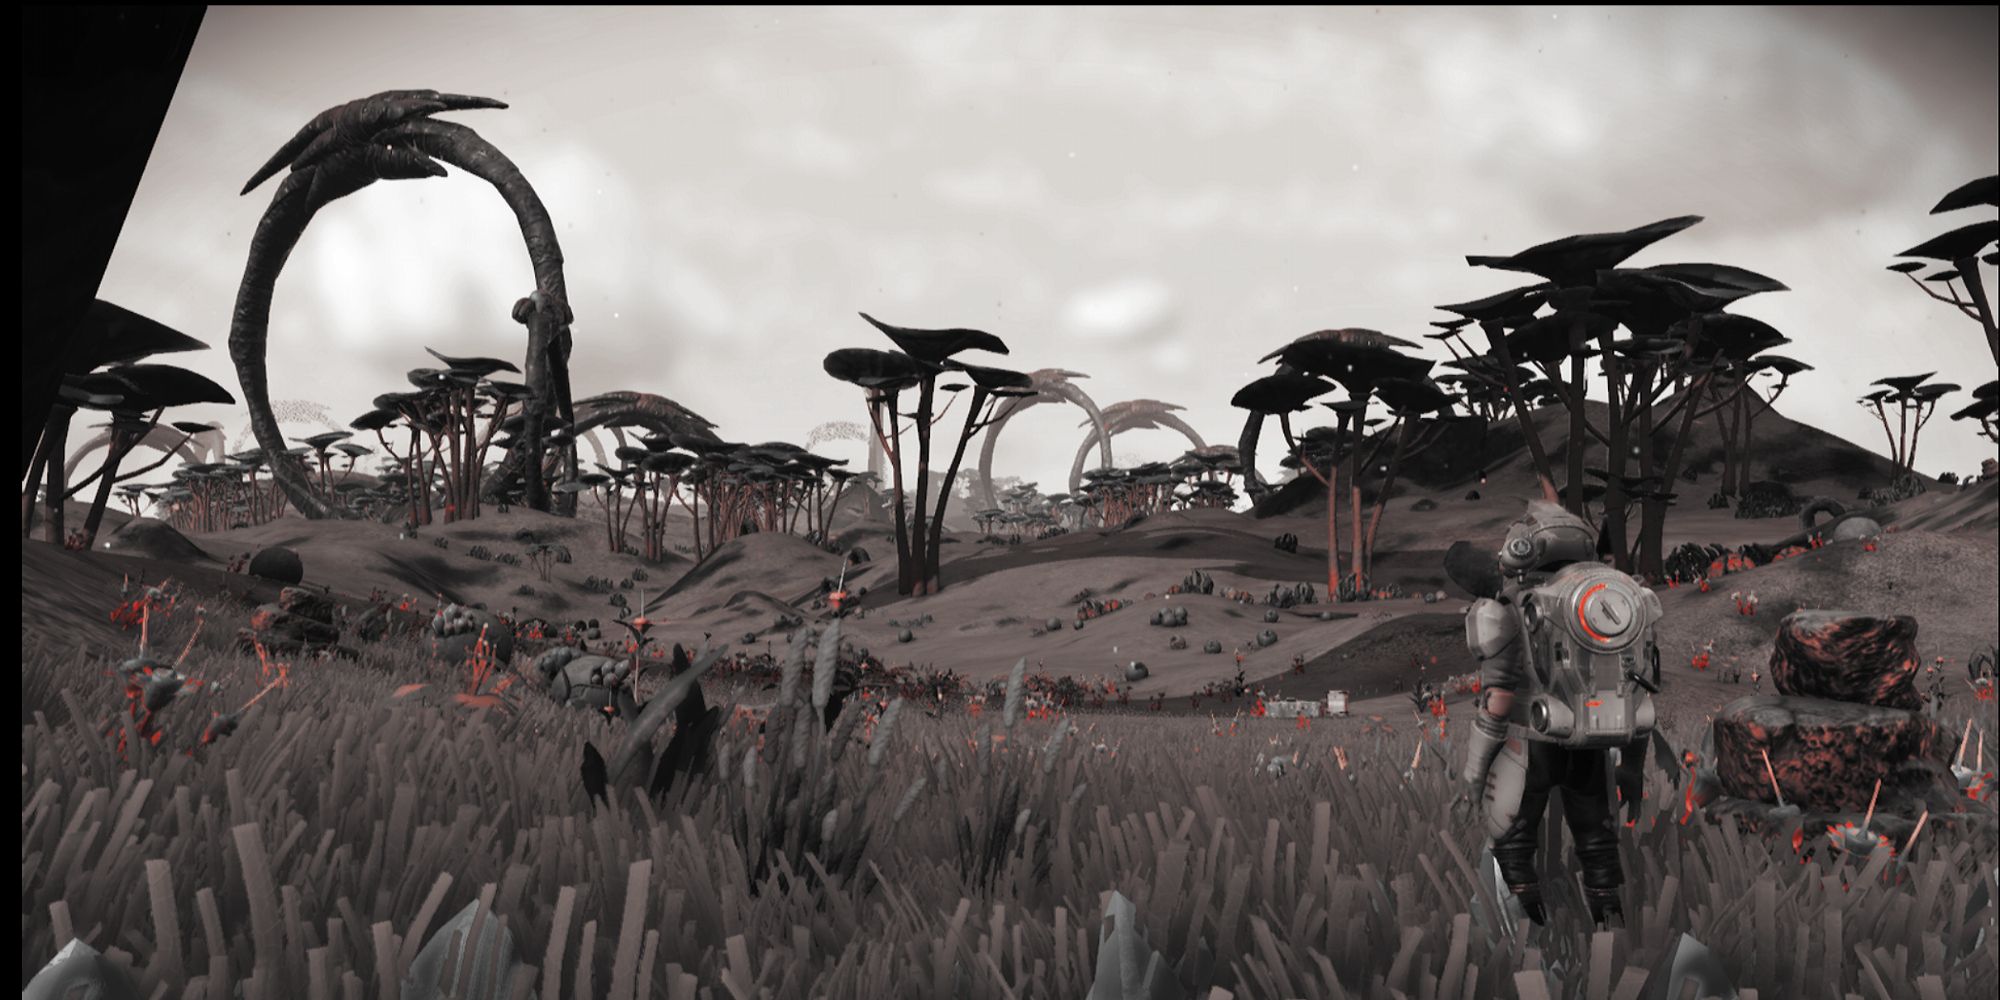 An image from an Exotic Planet in No Man's Sky, which has turned the entire game black and white, and contains strange and fantastical plantlife. 